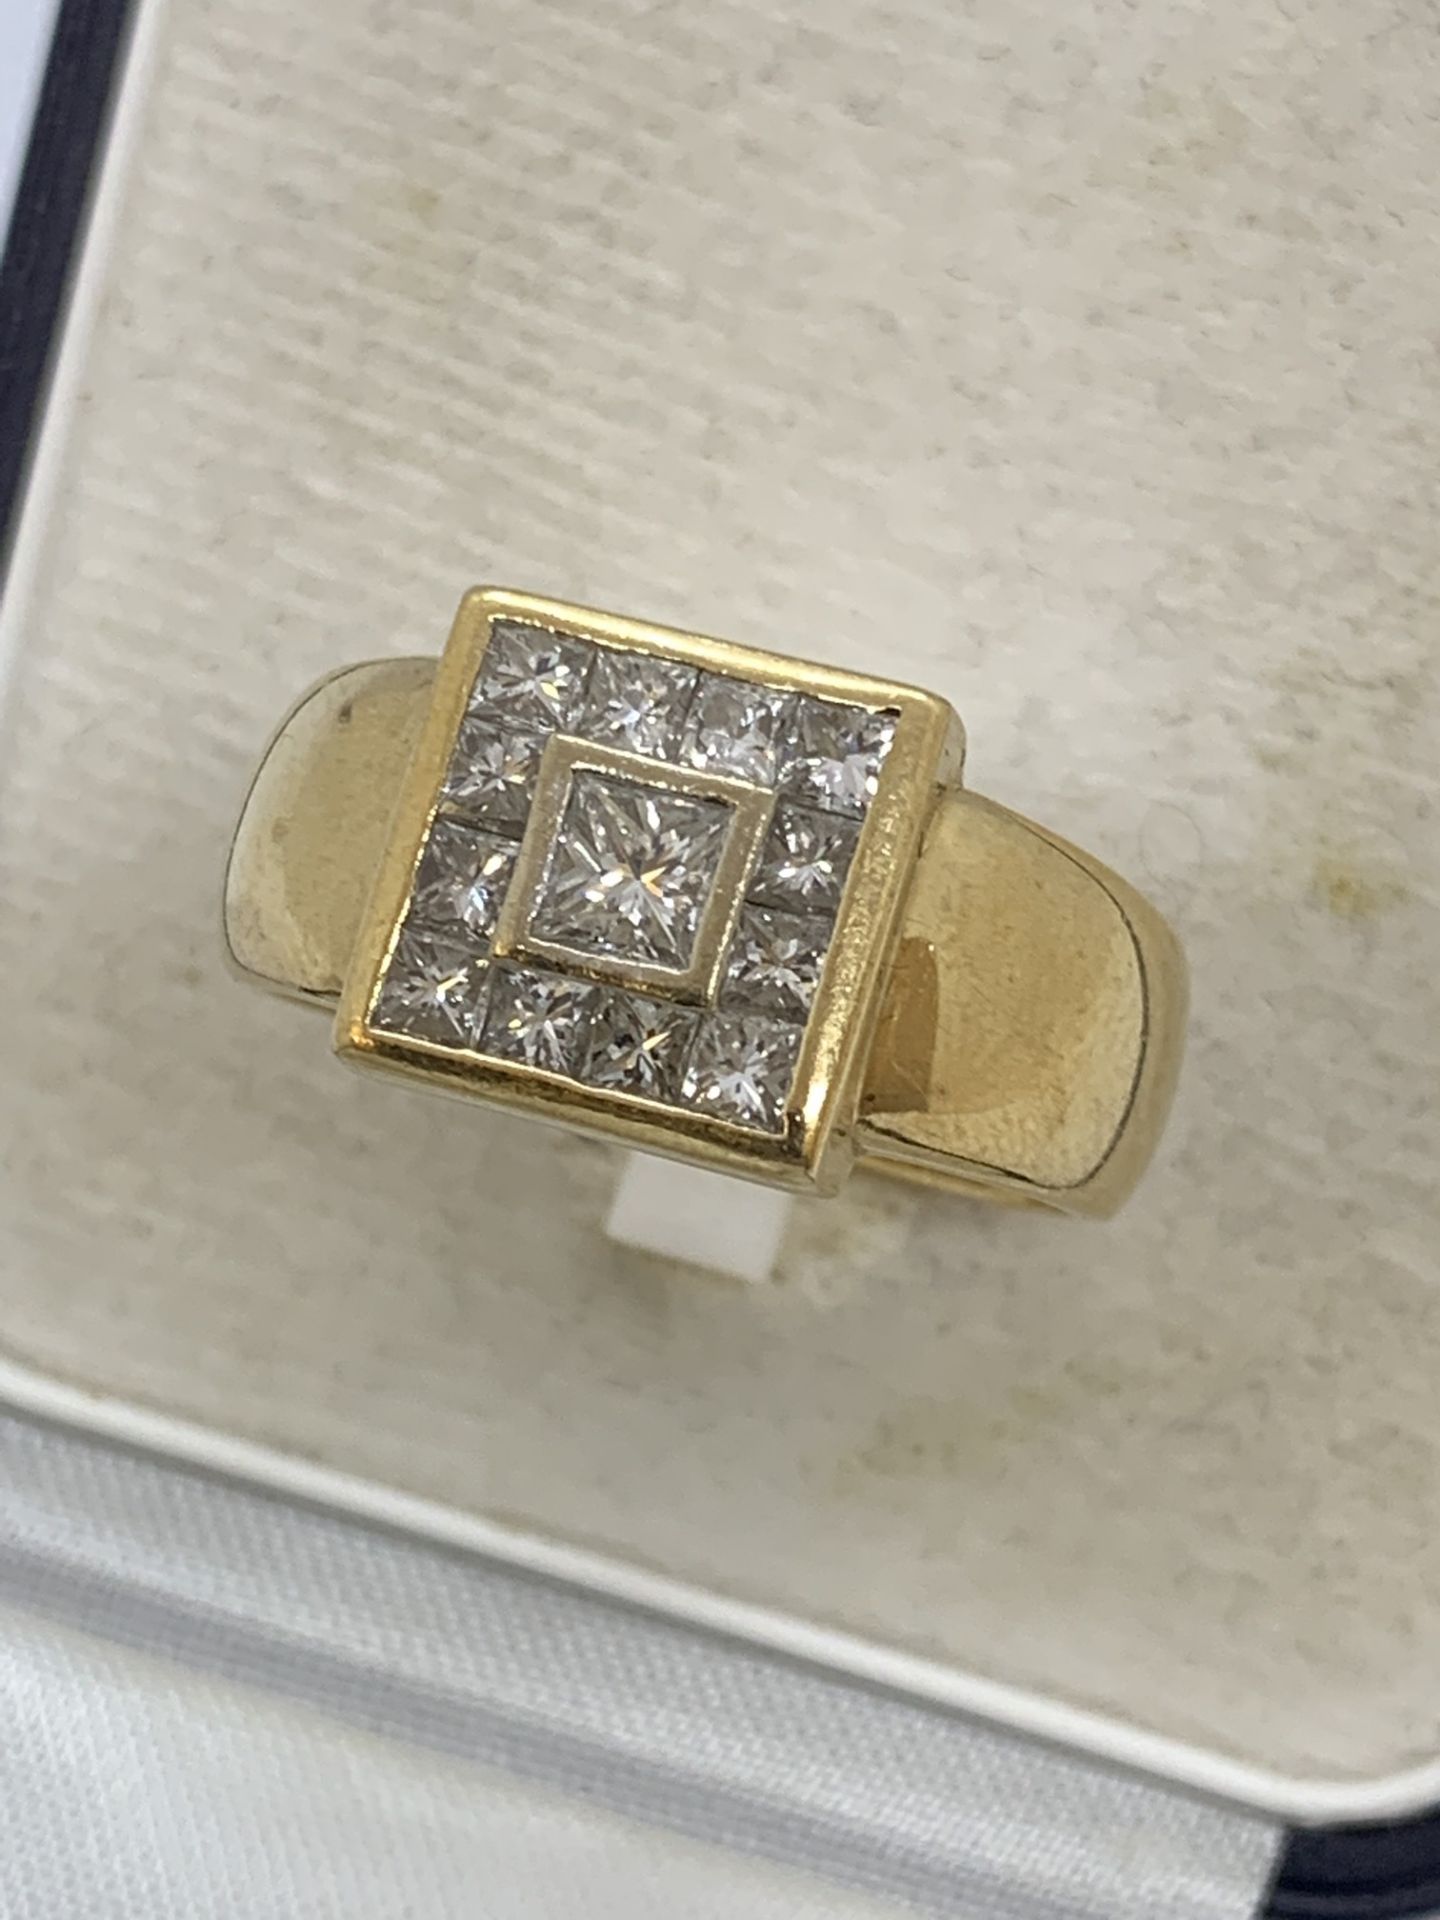 DIAMOND SET RING IN 18ct YELLOW GOLD - 11.4g APPROX - SIZE T APPROX - Image 3 of 3